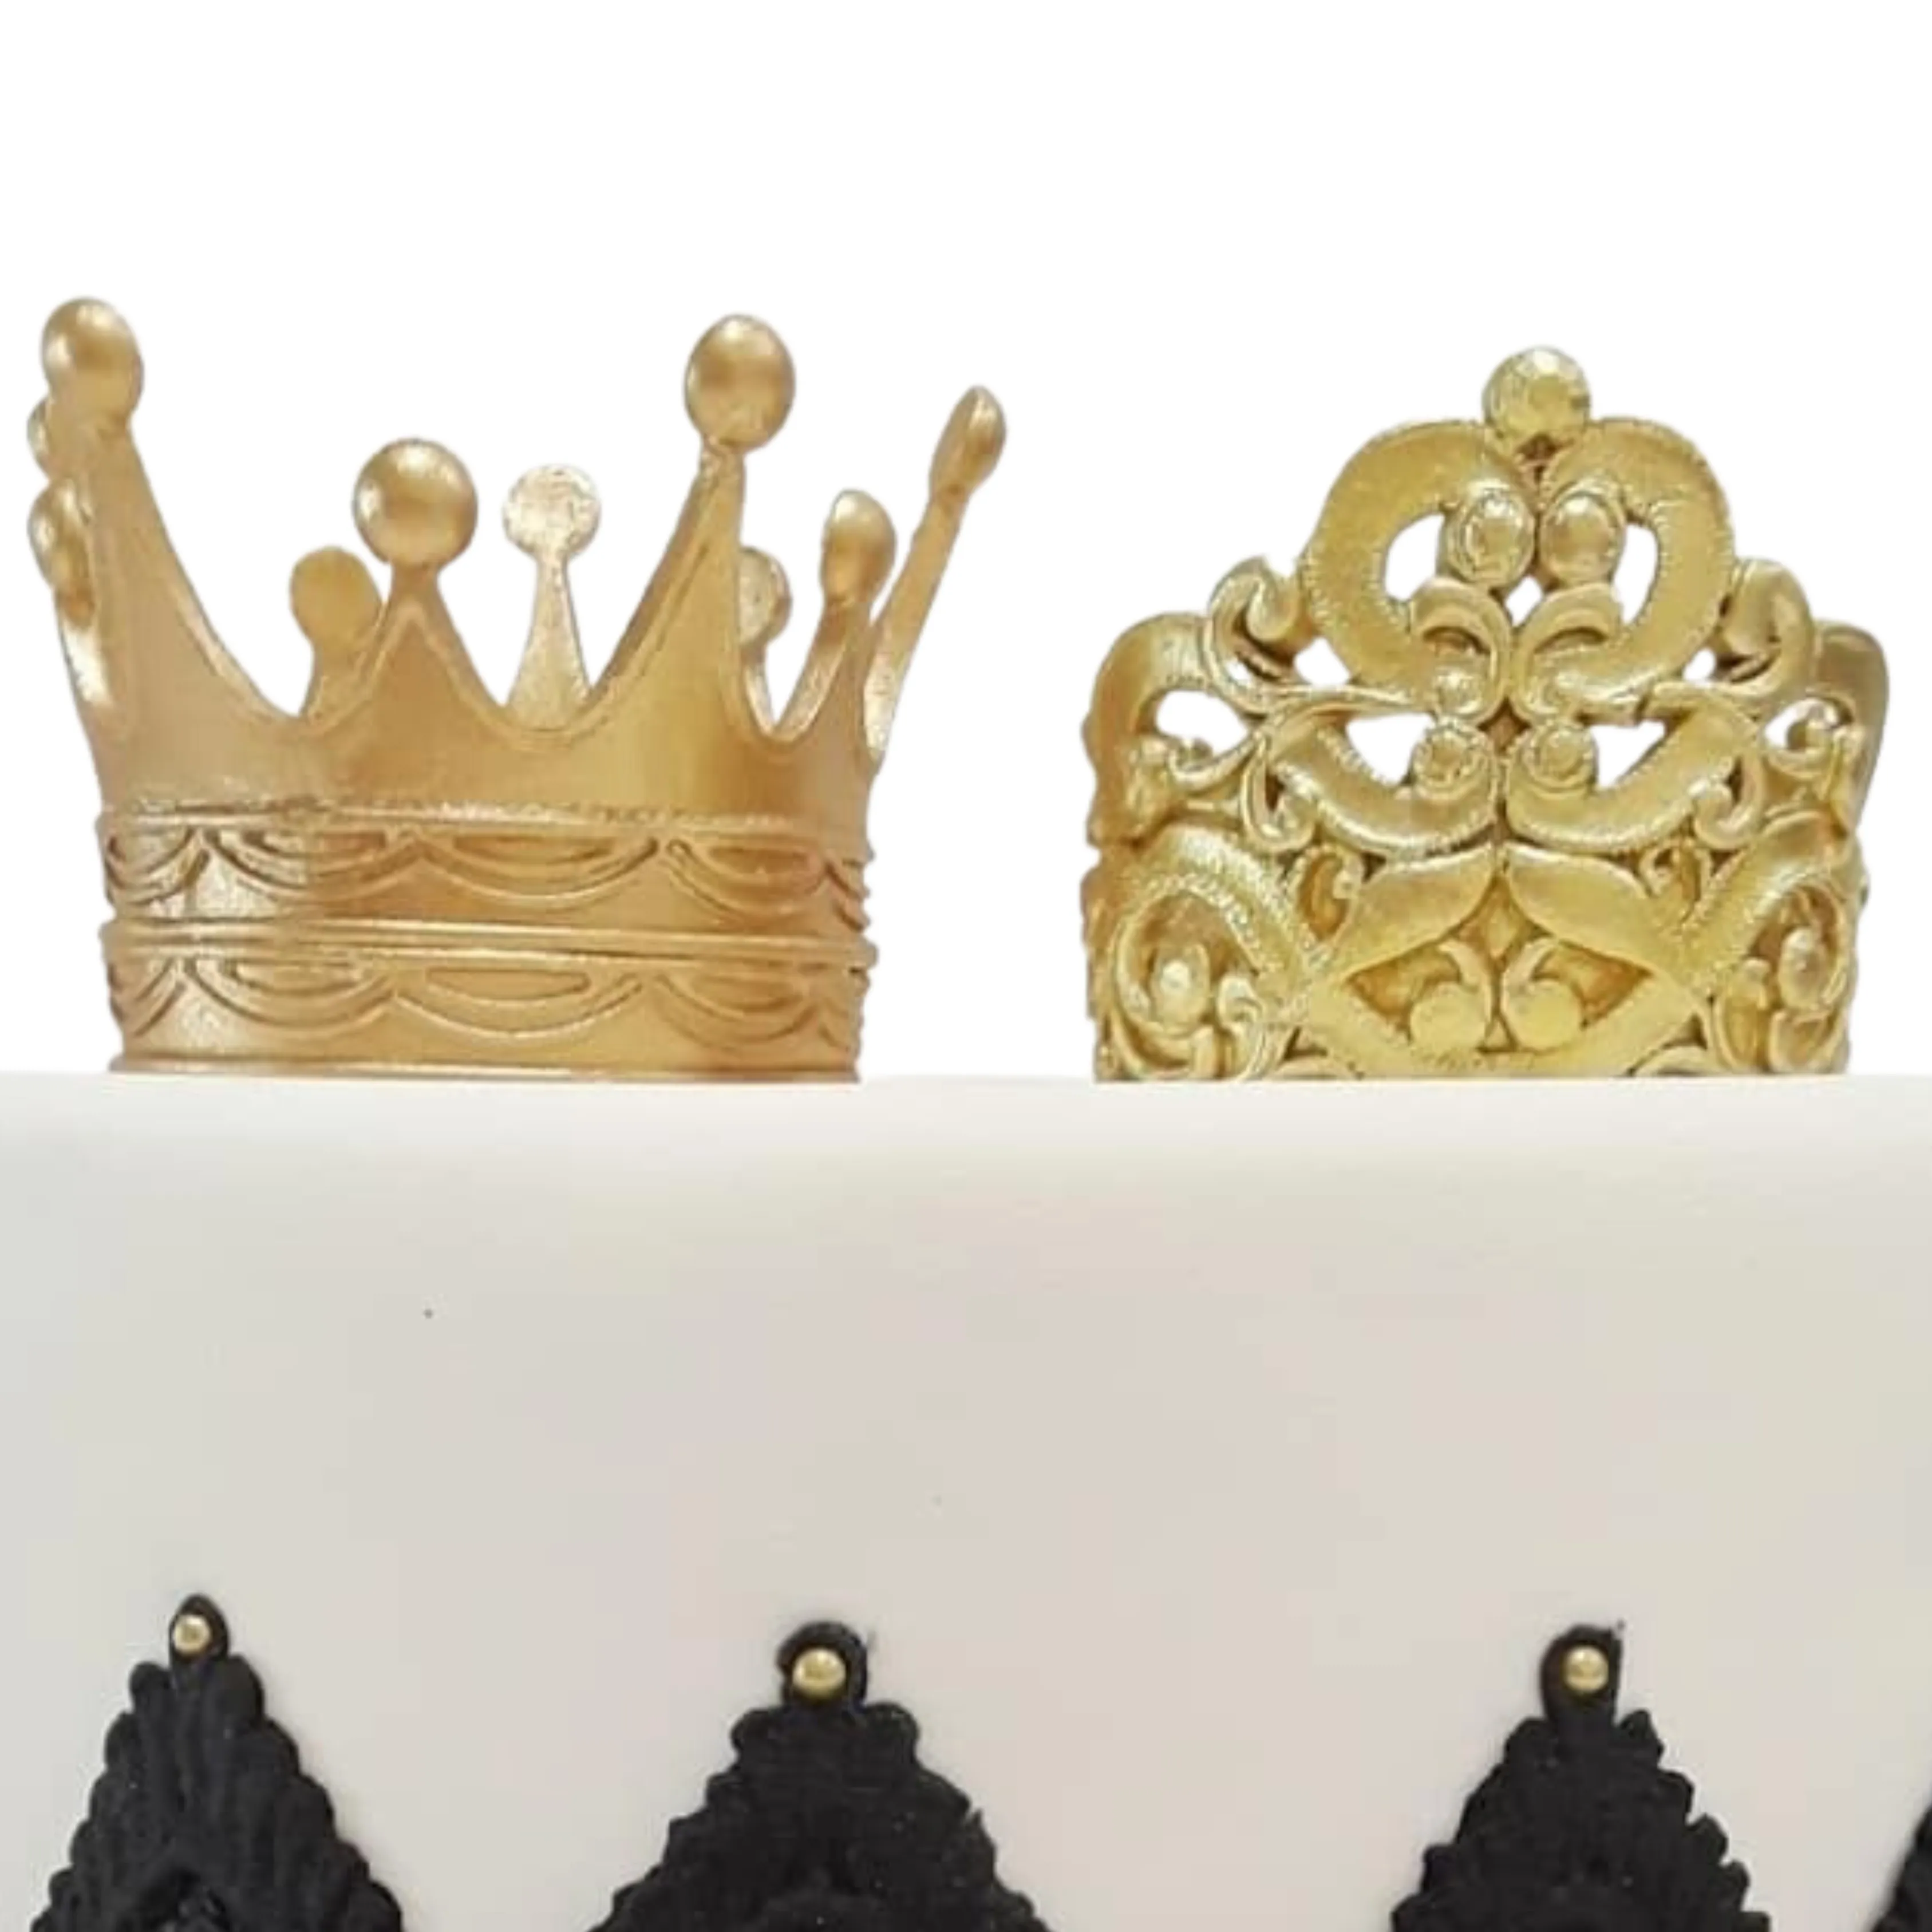 Queen And King Fondant Cake for Anniversary